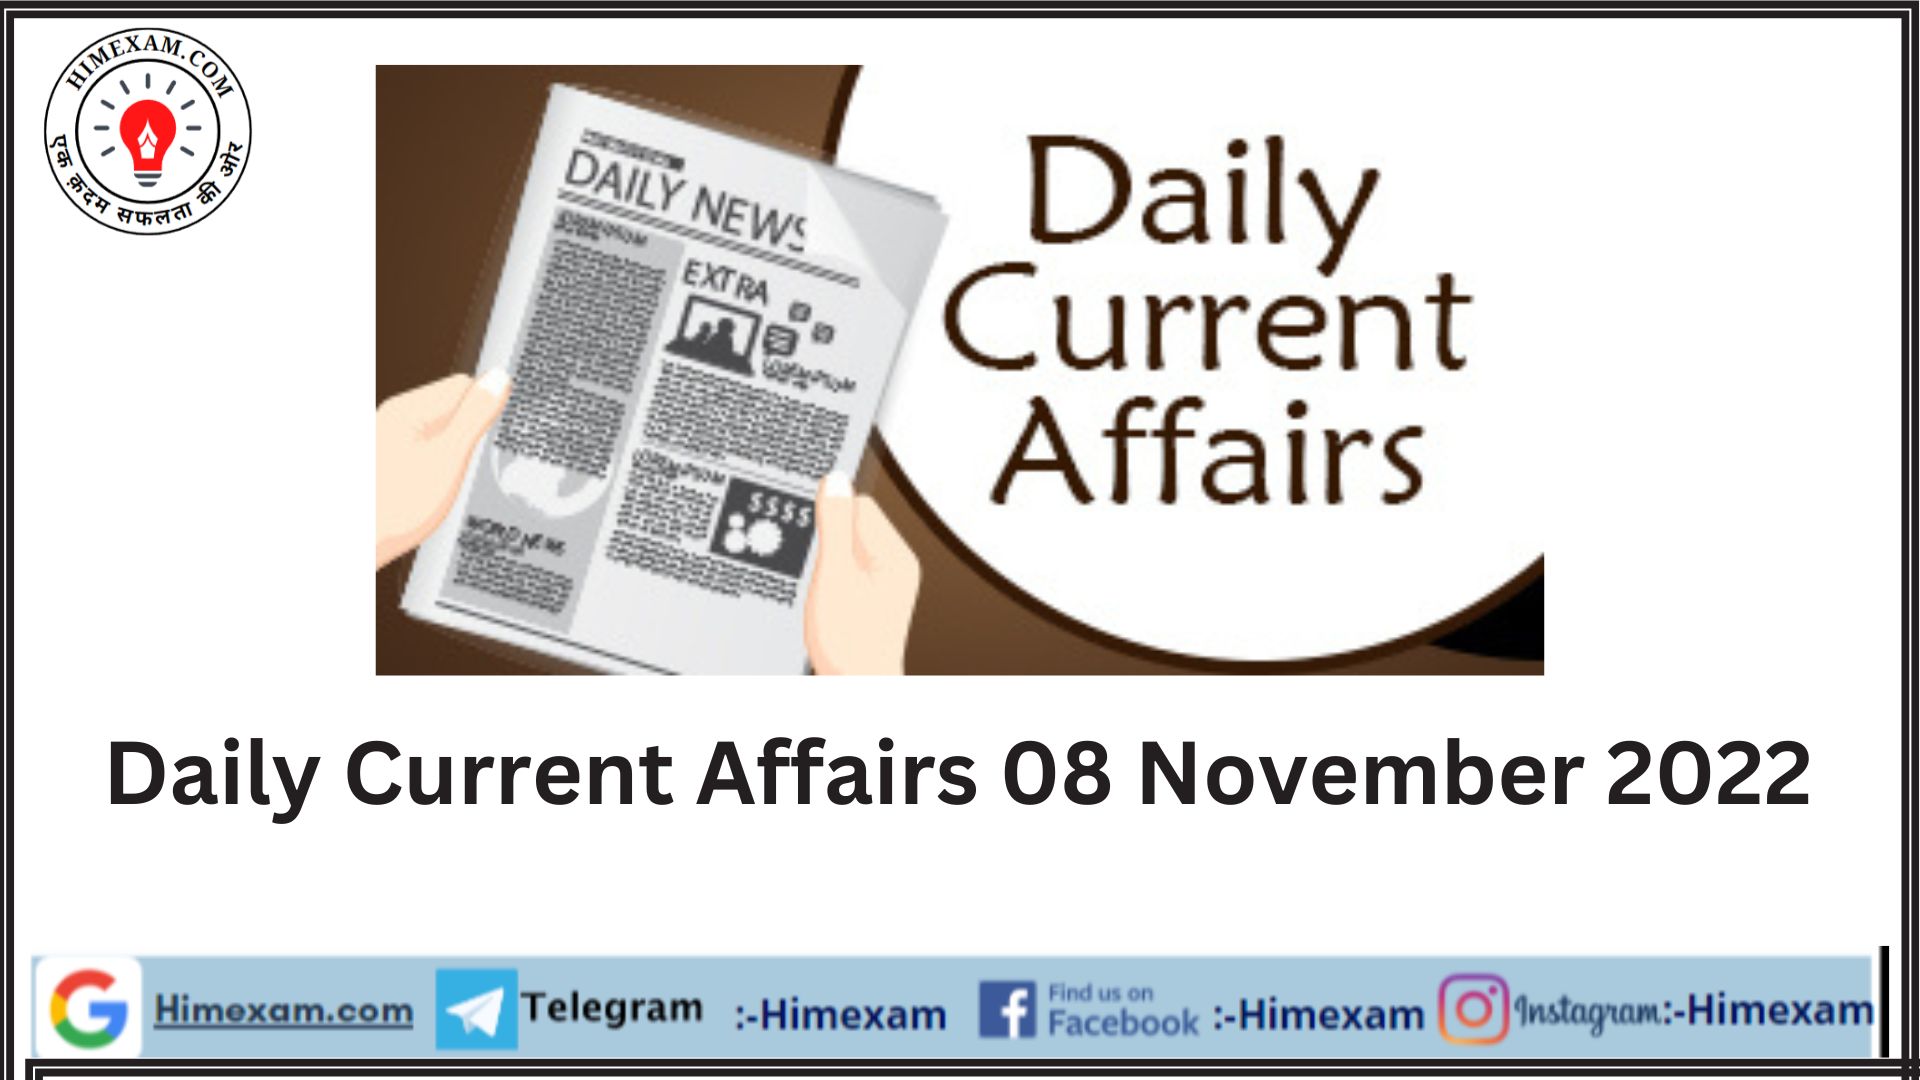 Daily Current Affairs 08 November 2022